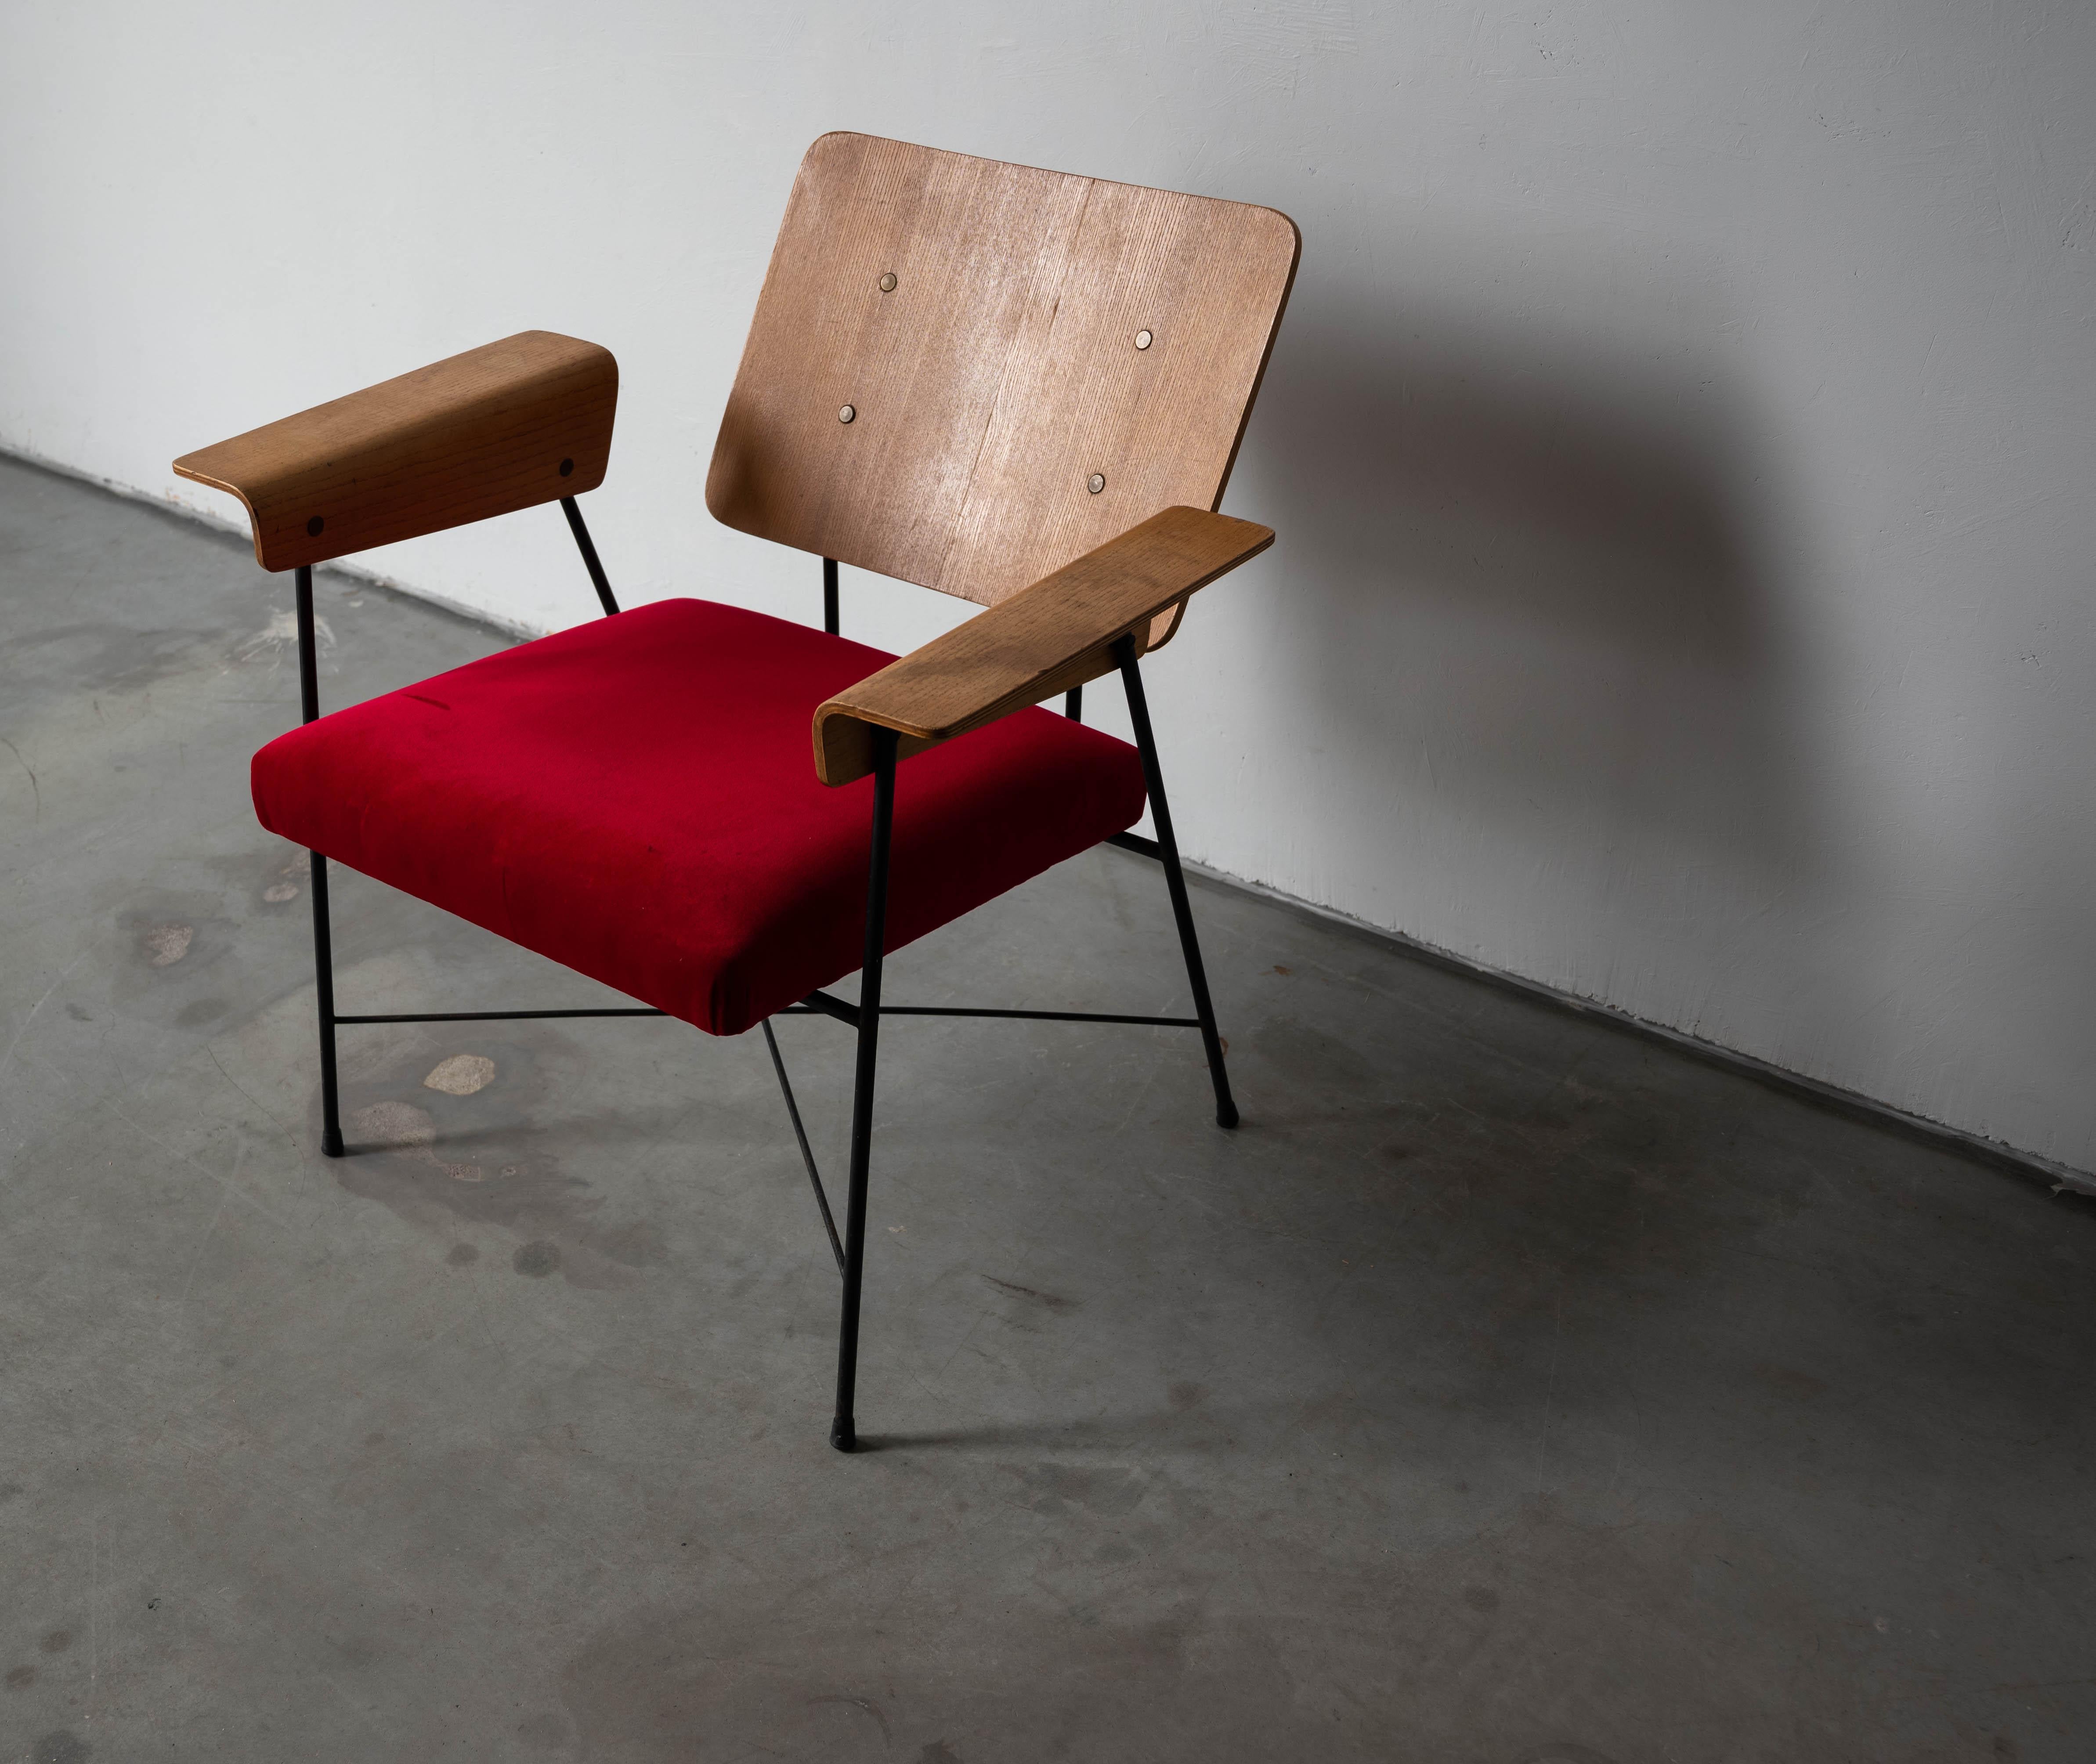 George Coslin, Lounge Chairs, Metal, Red Fabric, Plywood, Italy, 1960s For Sale 2